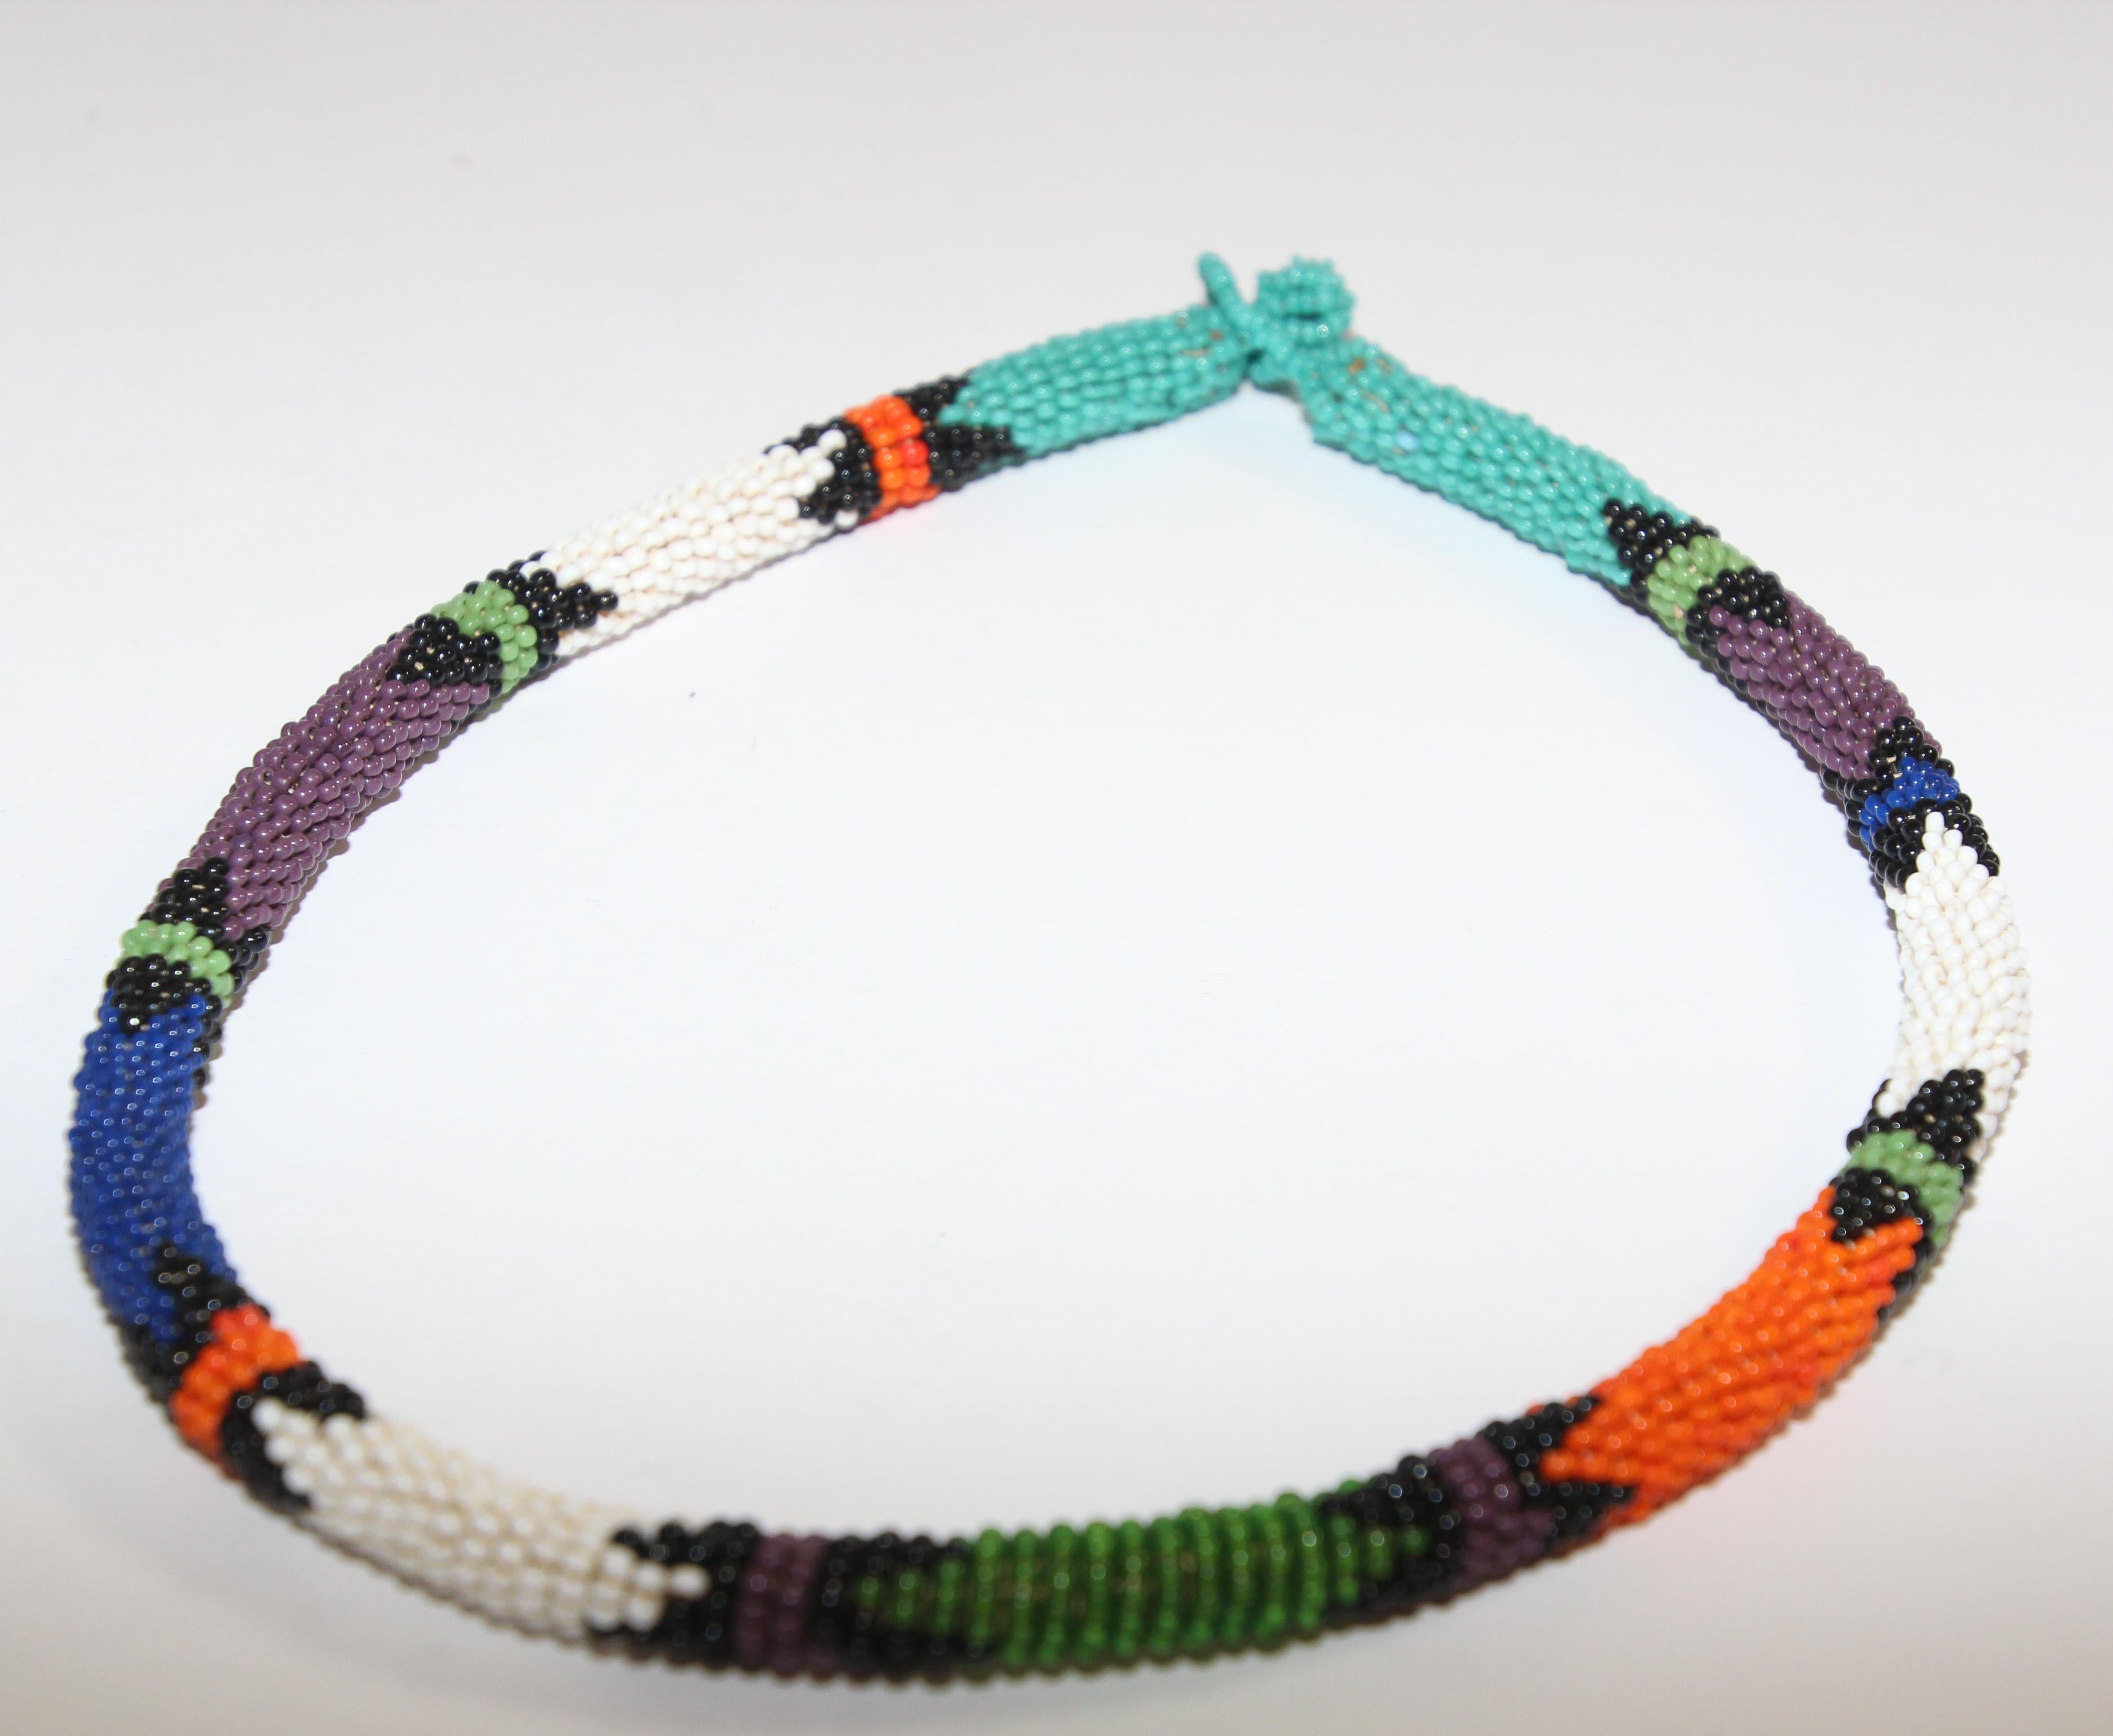 Vintage African Urembo beaded necklace choker.
Handmade in Kenya by the maasai tribe.
Urembo means “beauty” and the handmade pattern and unique color pairings will make a bold statement.
Size: 21